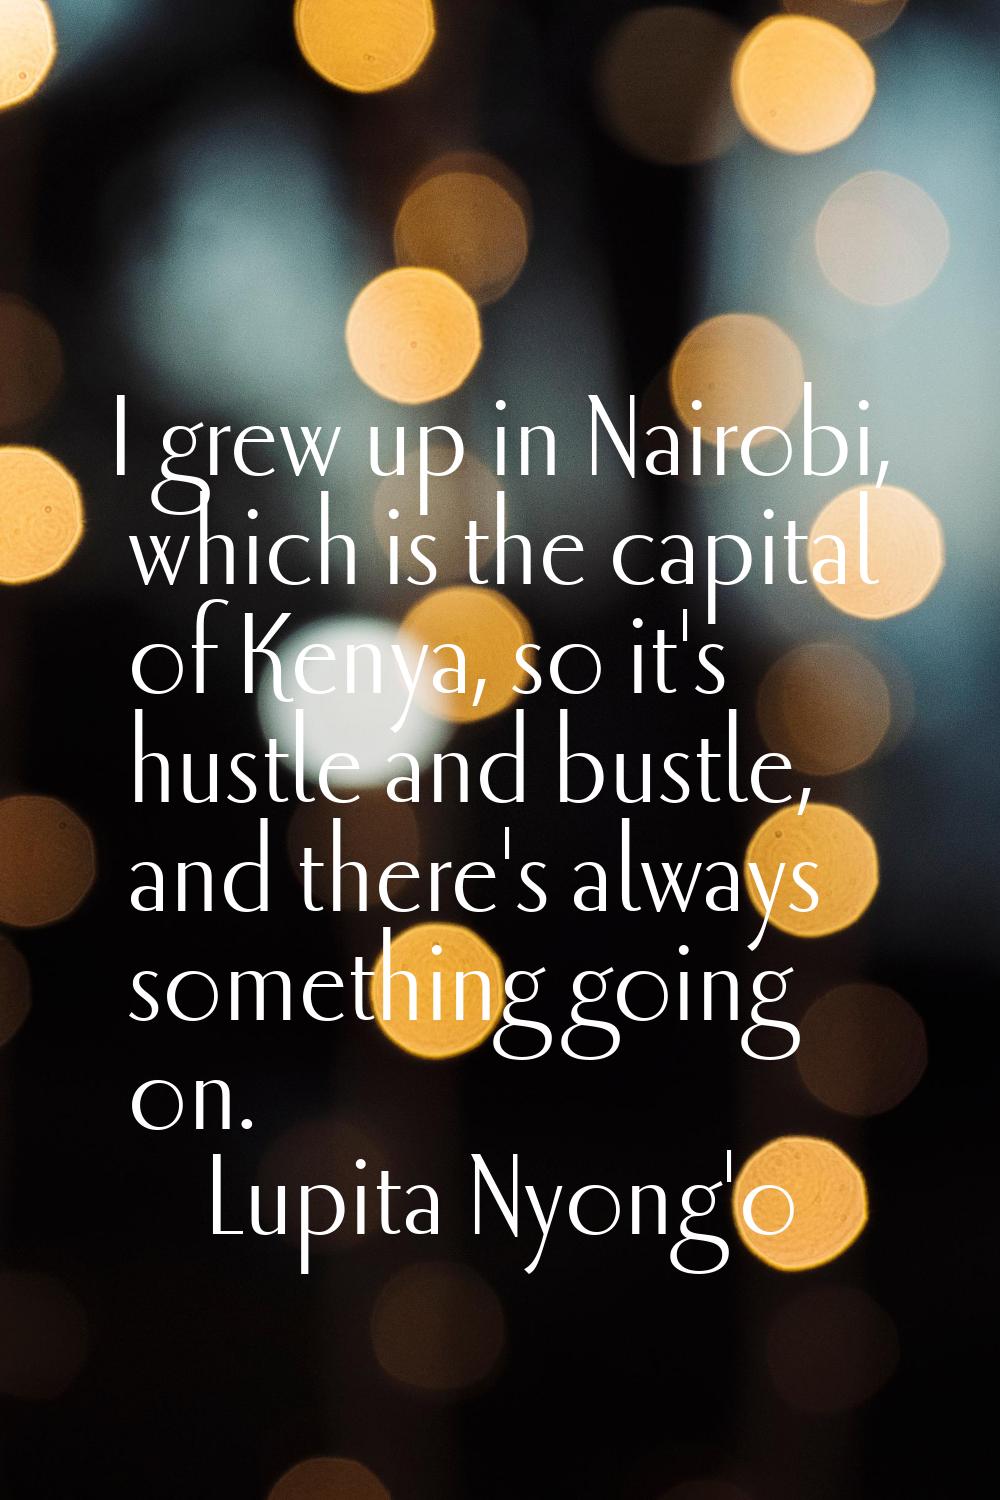 I grew up in Nairobi, which is the capital of Kenya, so it's hustle and bustle, and there's always 